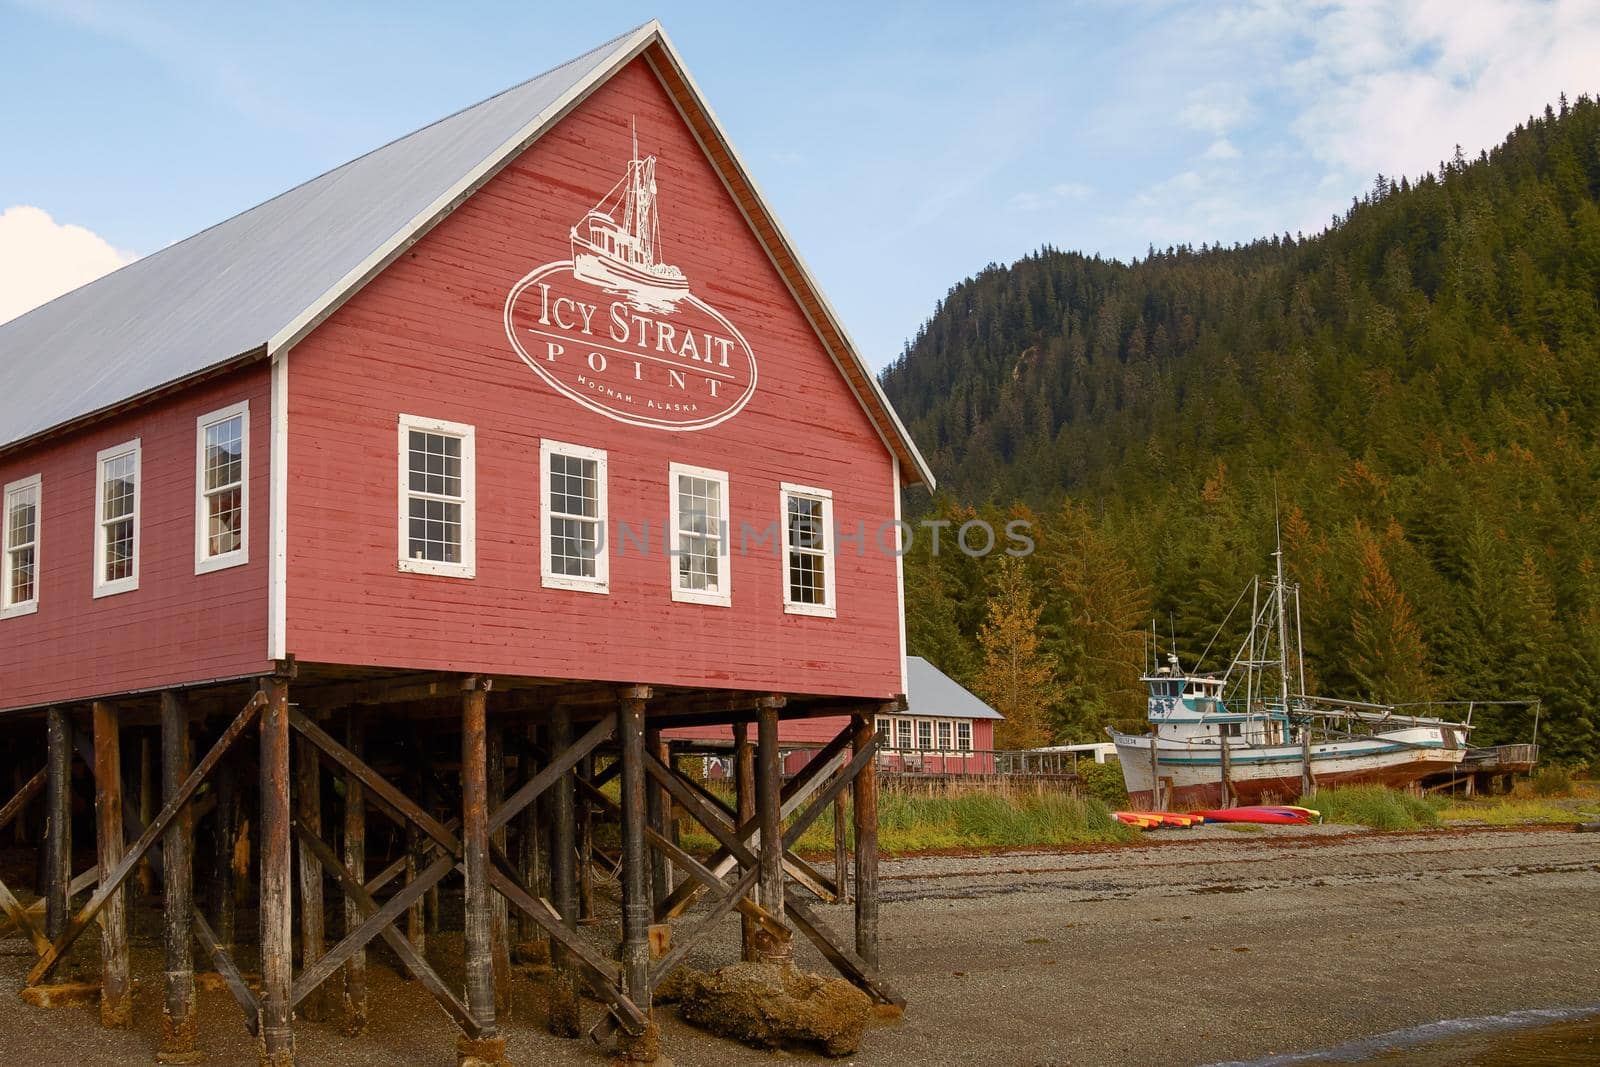 Welcome Center in Icy Strait Point Hoonah Alaska by wondry